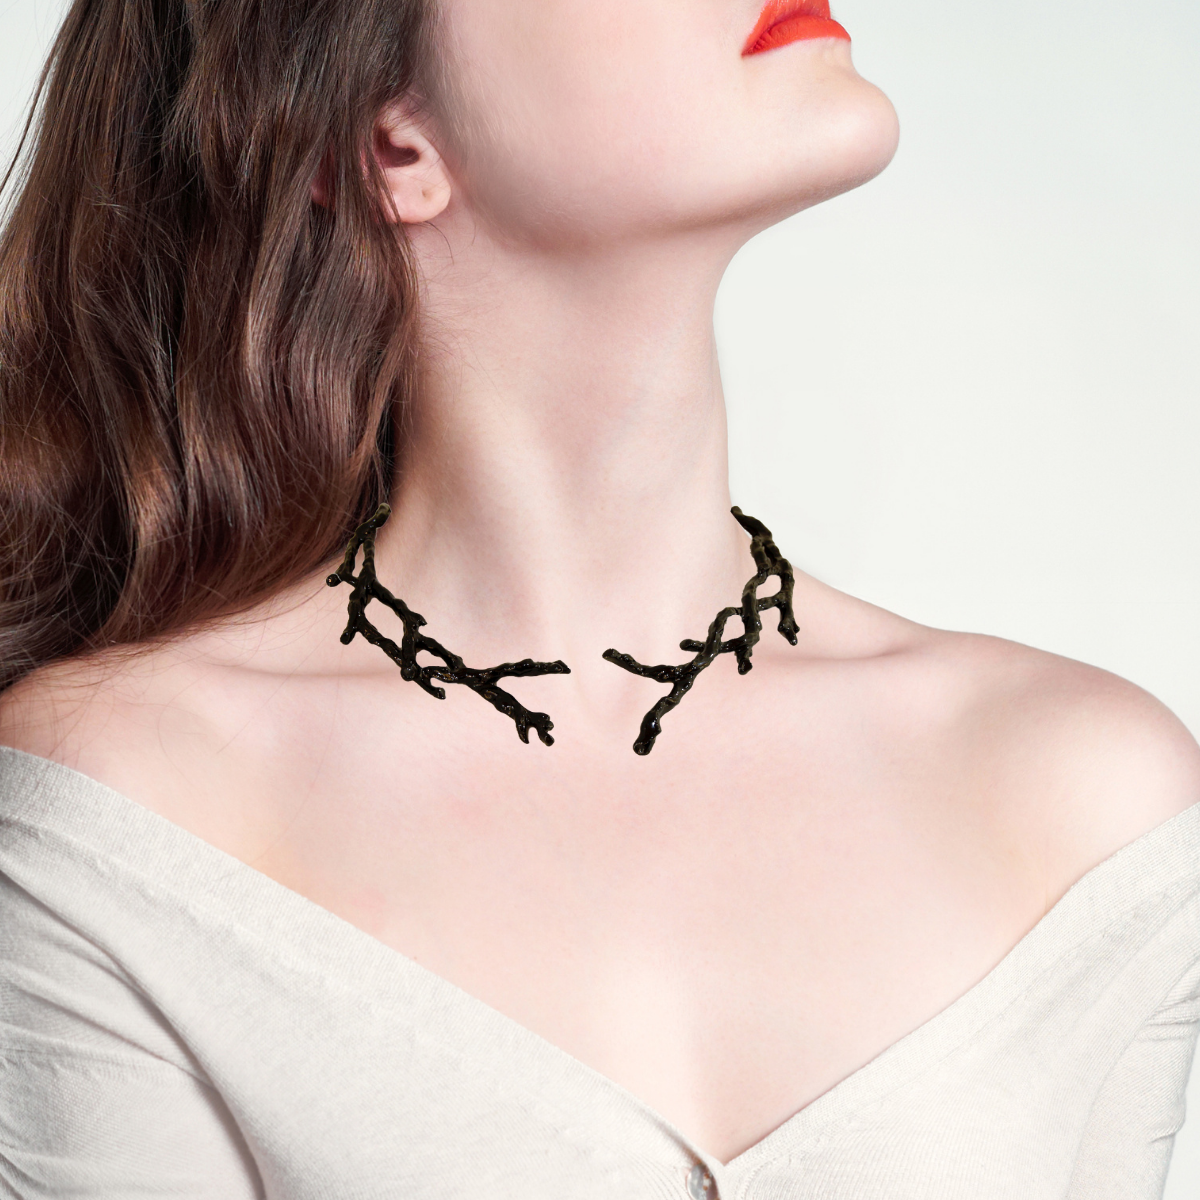 Necklace coral-shaped black small